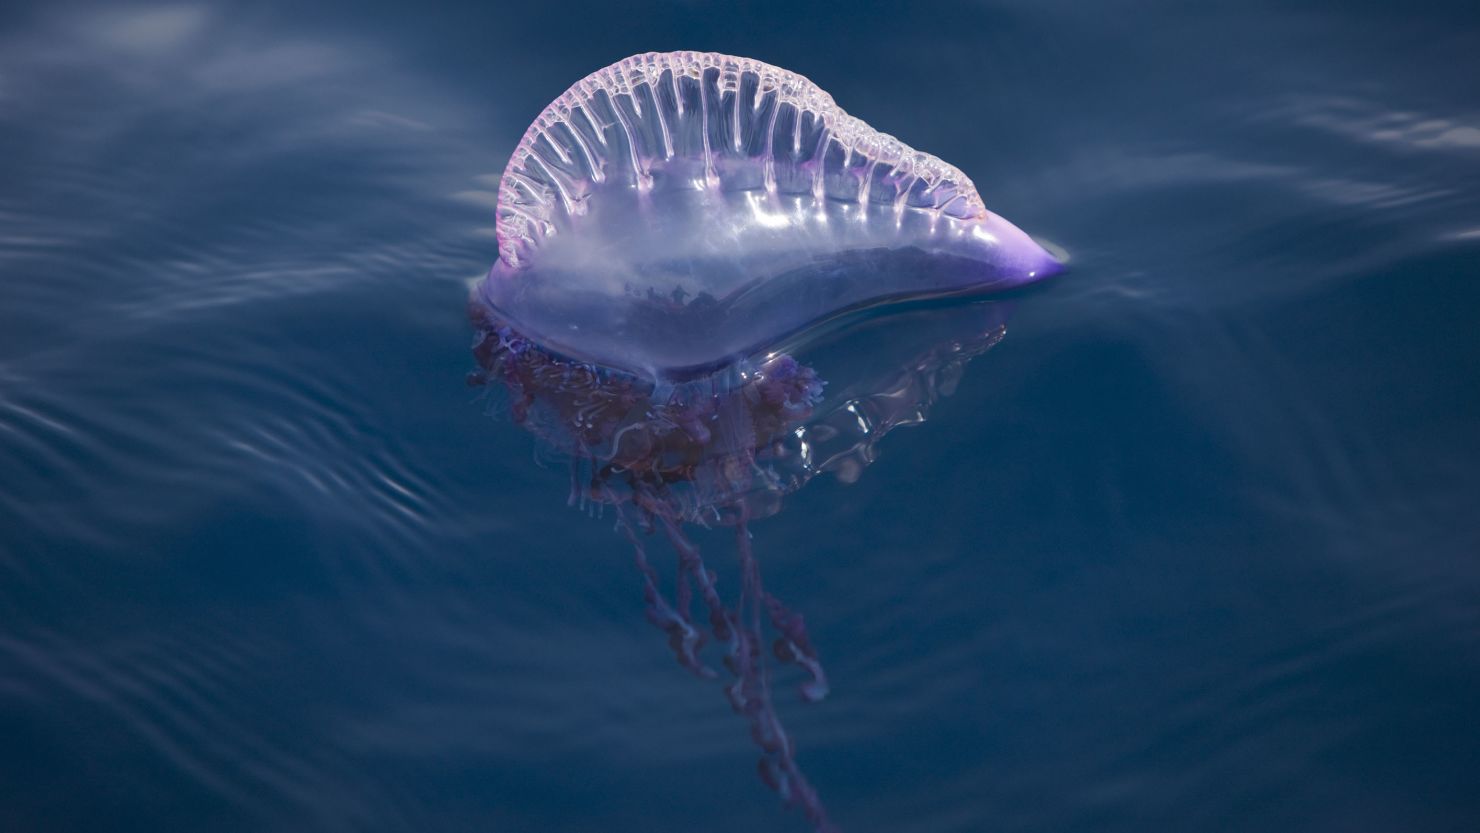 Strong northeasterly winds forced the bluebottle jellyfish ashore (stock photo).